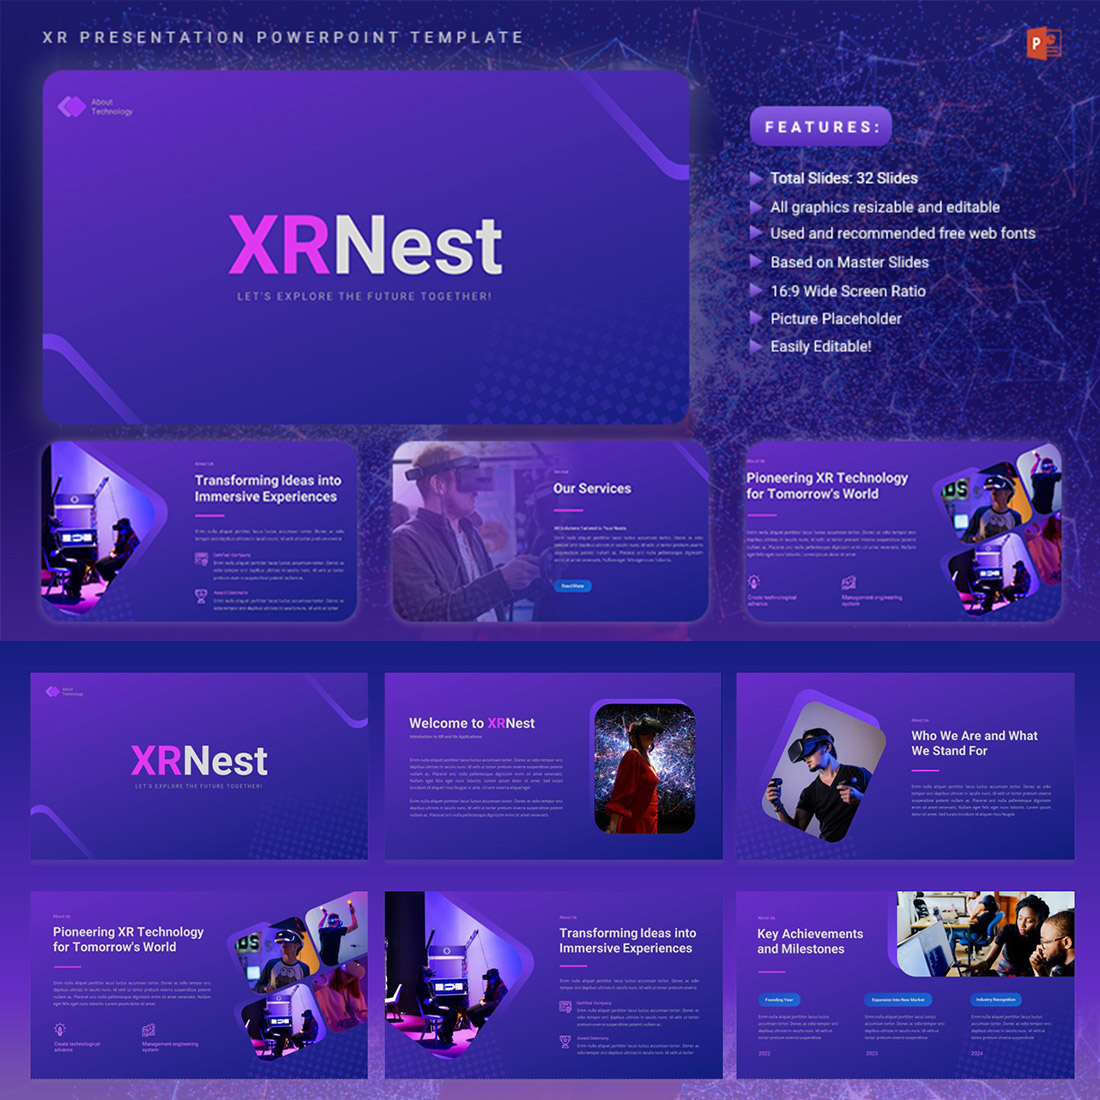 XRNest - XR Presentation PowerPoint Template preview image.